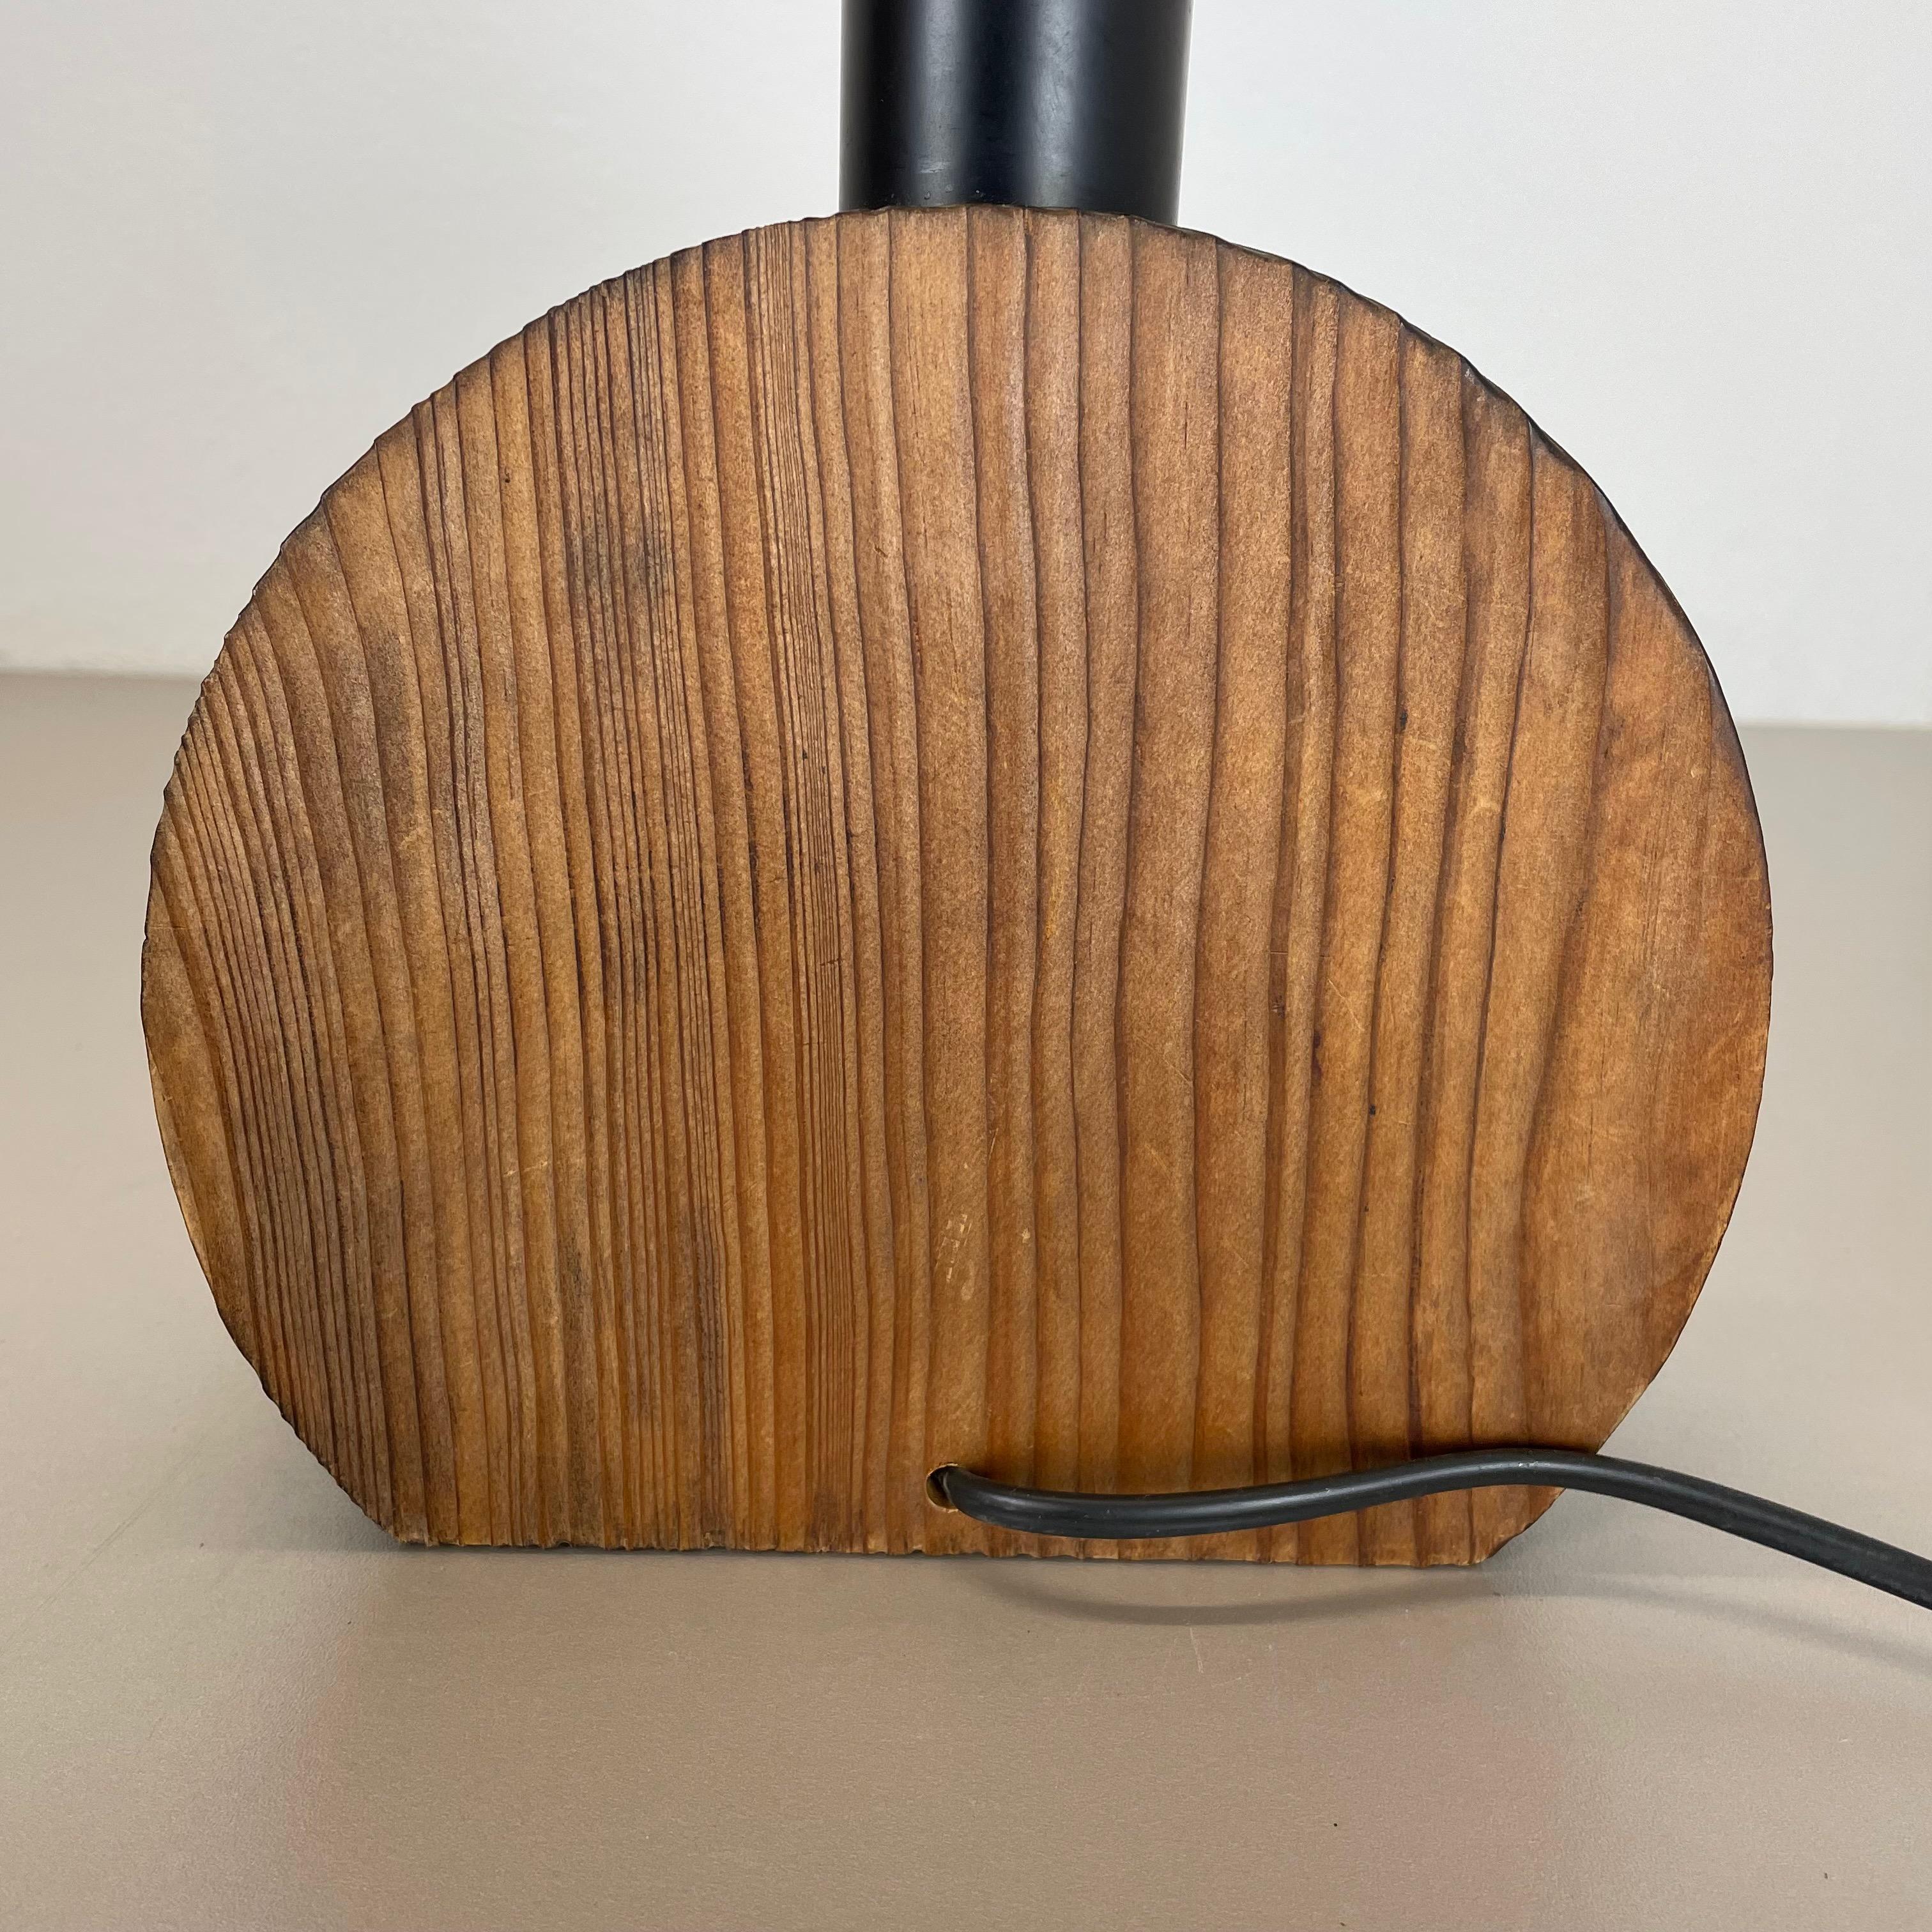 Organic Sculptural Wooden Table Light Made Temde Lights, Germany, 1970s For Sale 13